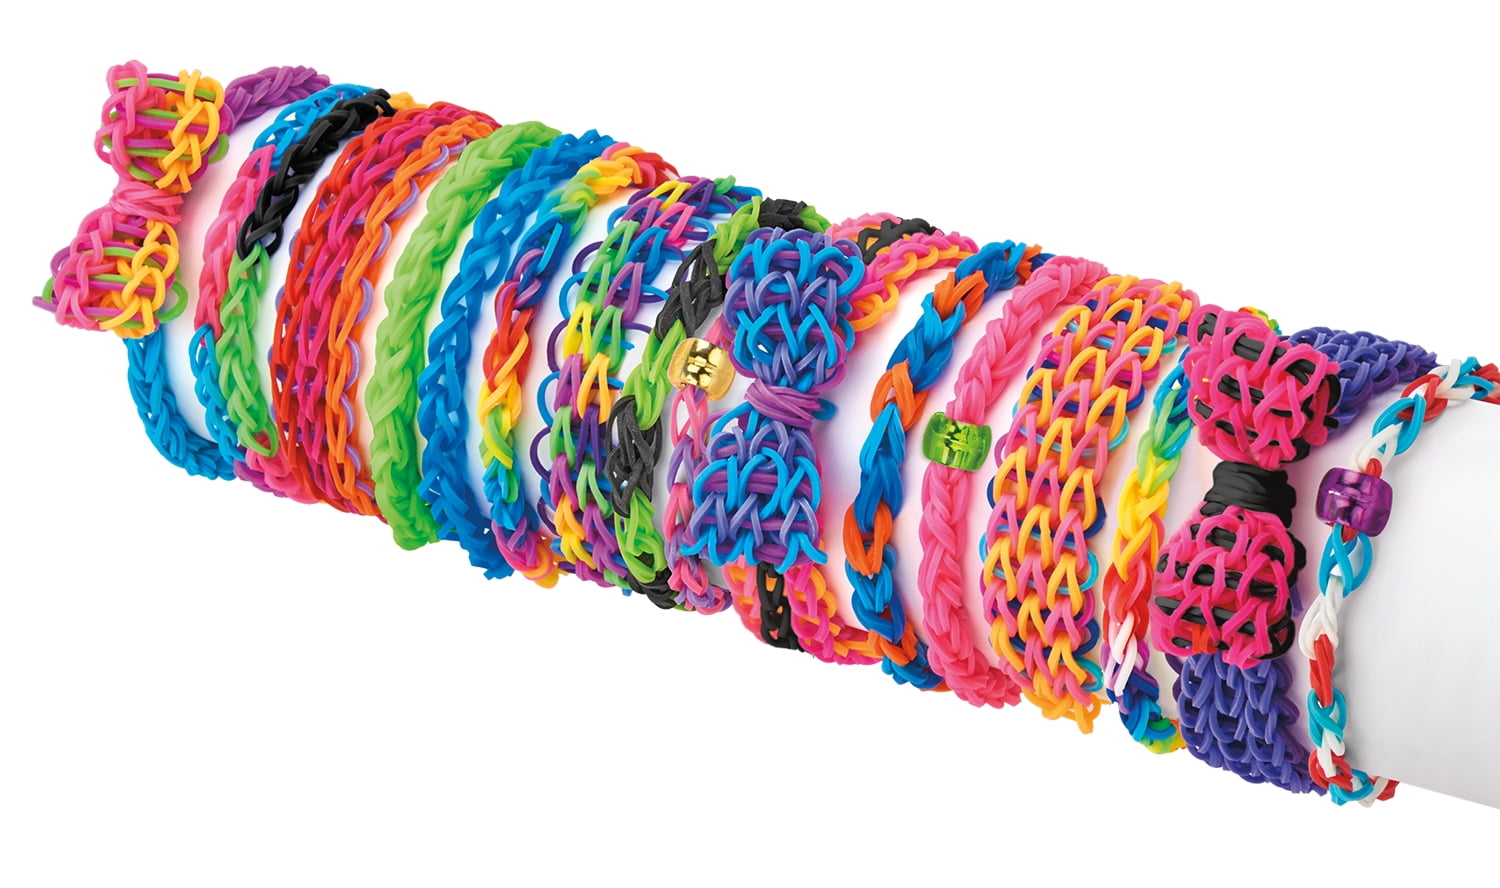 Cra-Z-Loom Bands Ultimate Tub Accessory Set by Cra-Z-Art